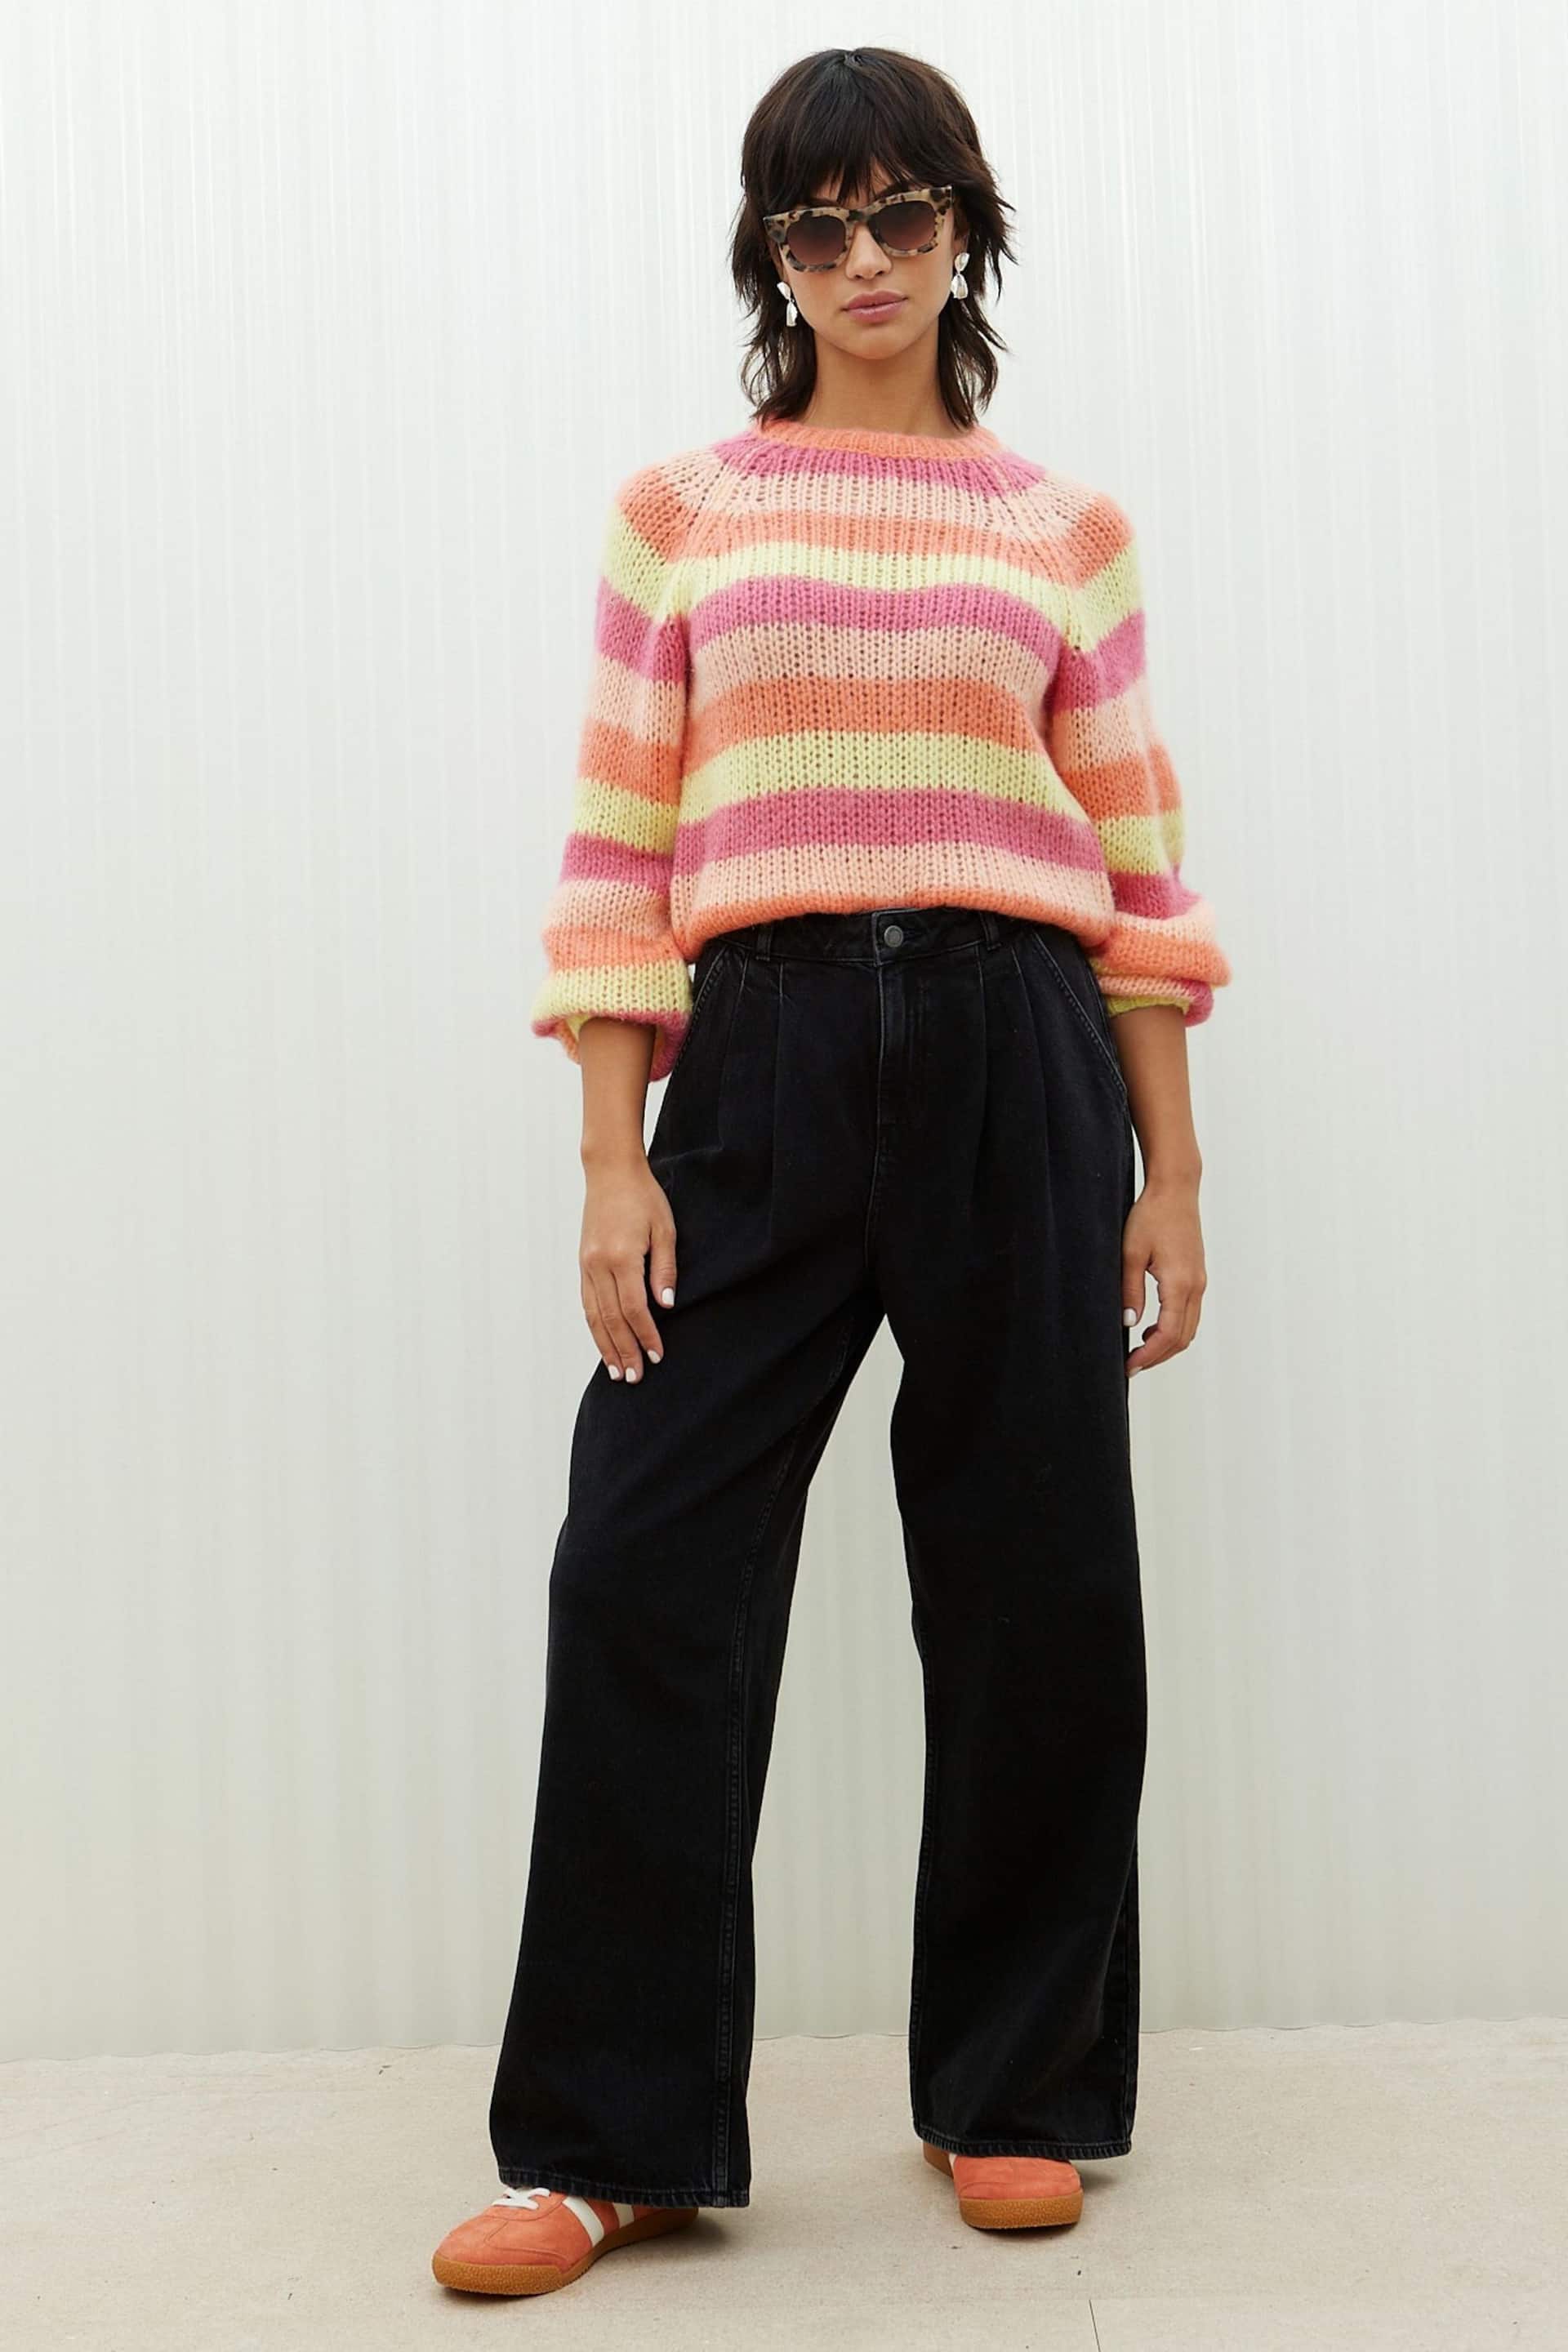 Oliver Bonas Multi Striped Lofty Knitted Jumper - Image 1 of 8